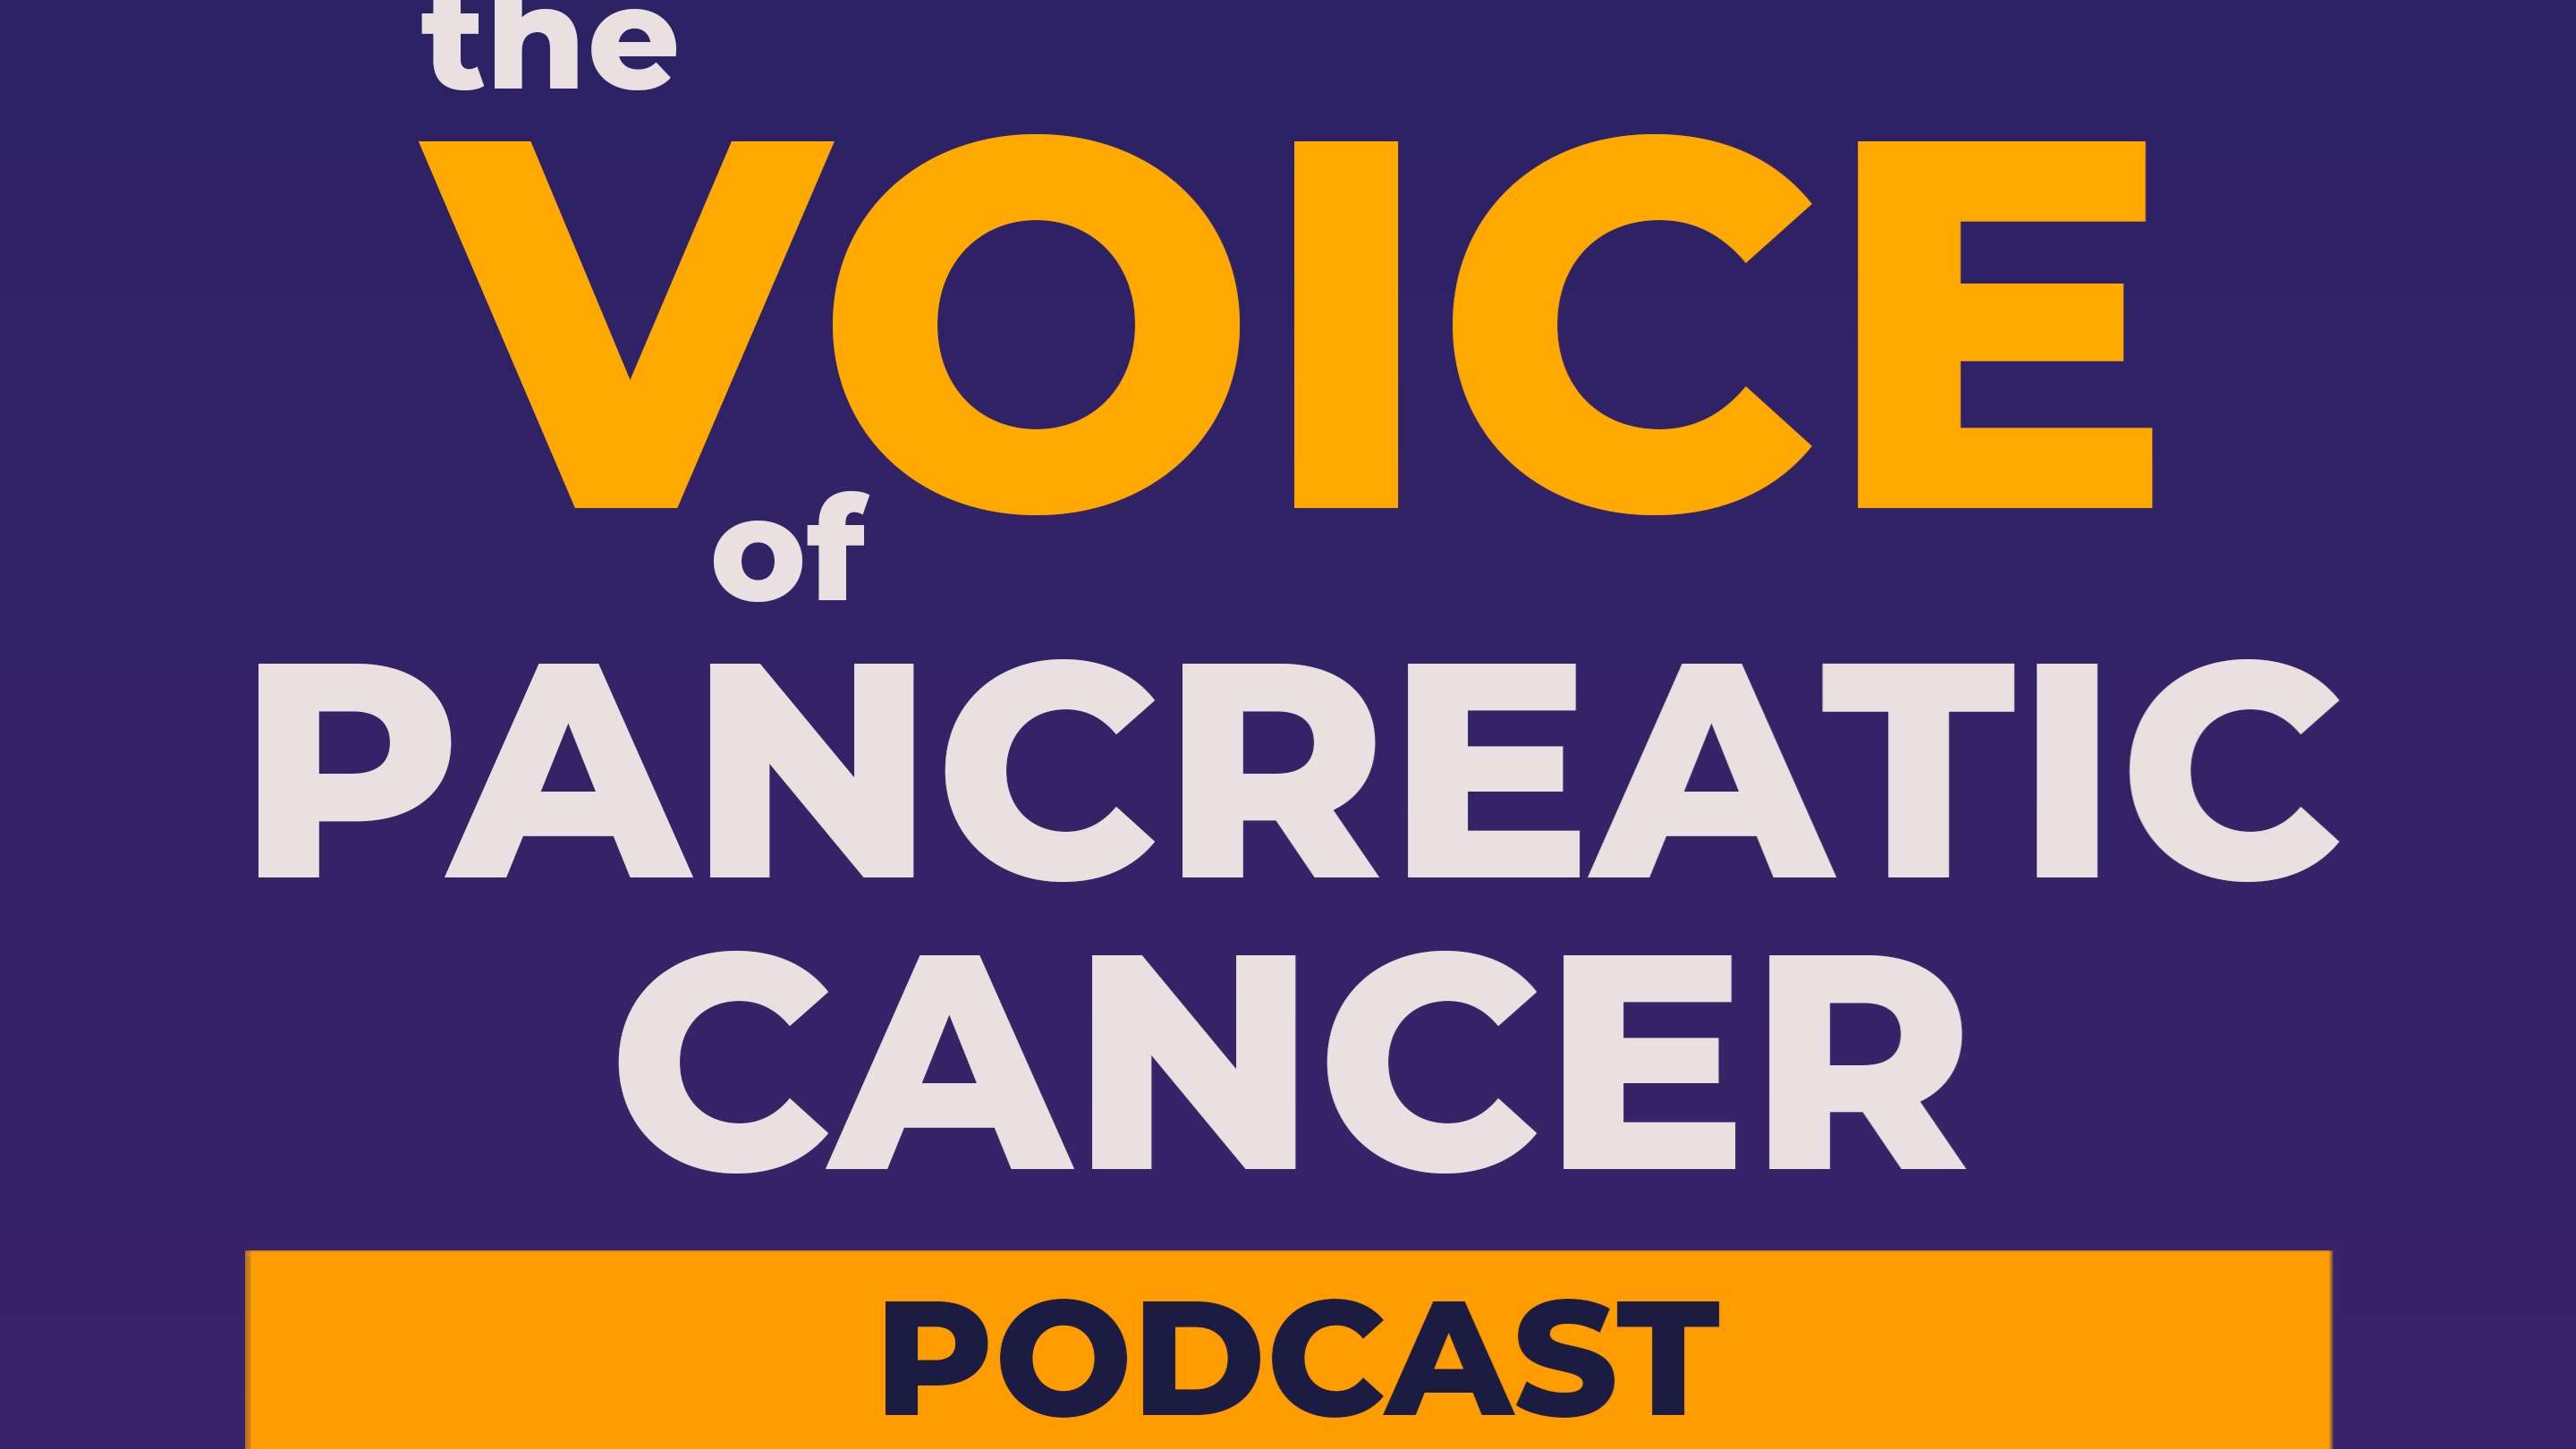 LOGO The Voice of Pancreatic Cancer Podcast.